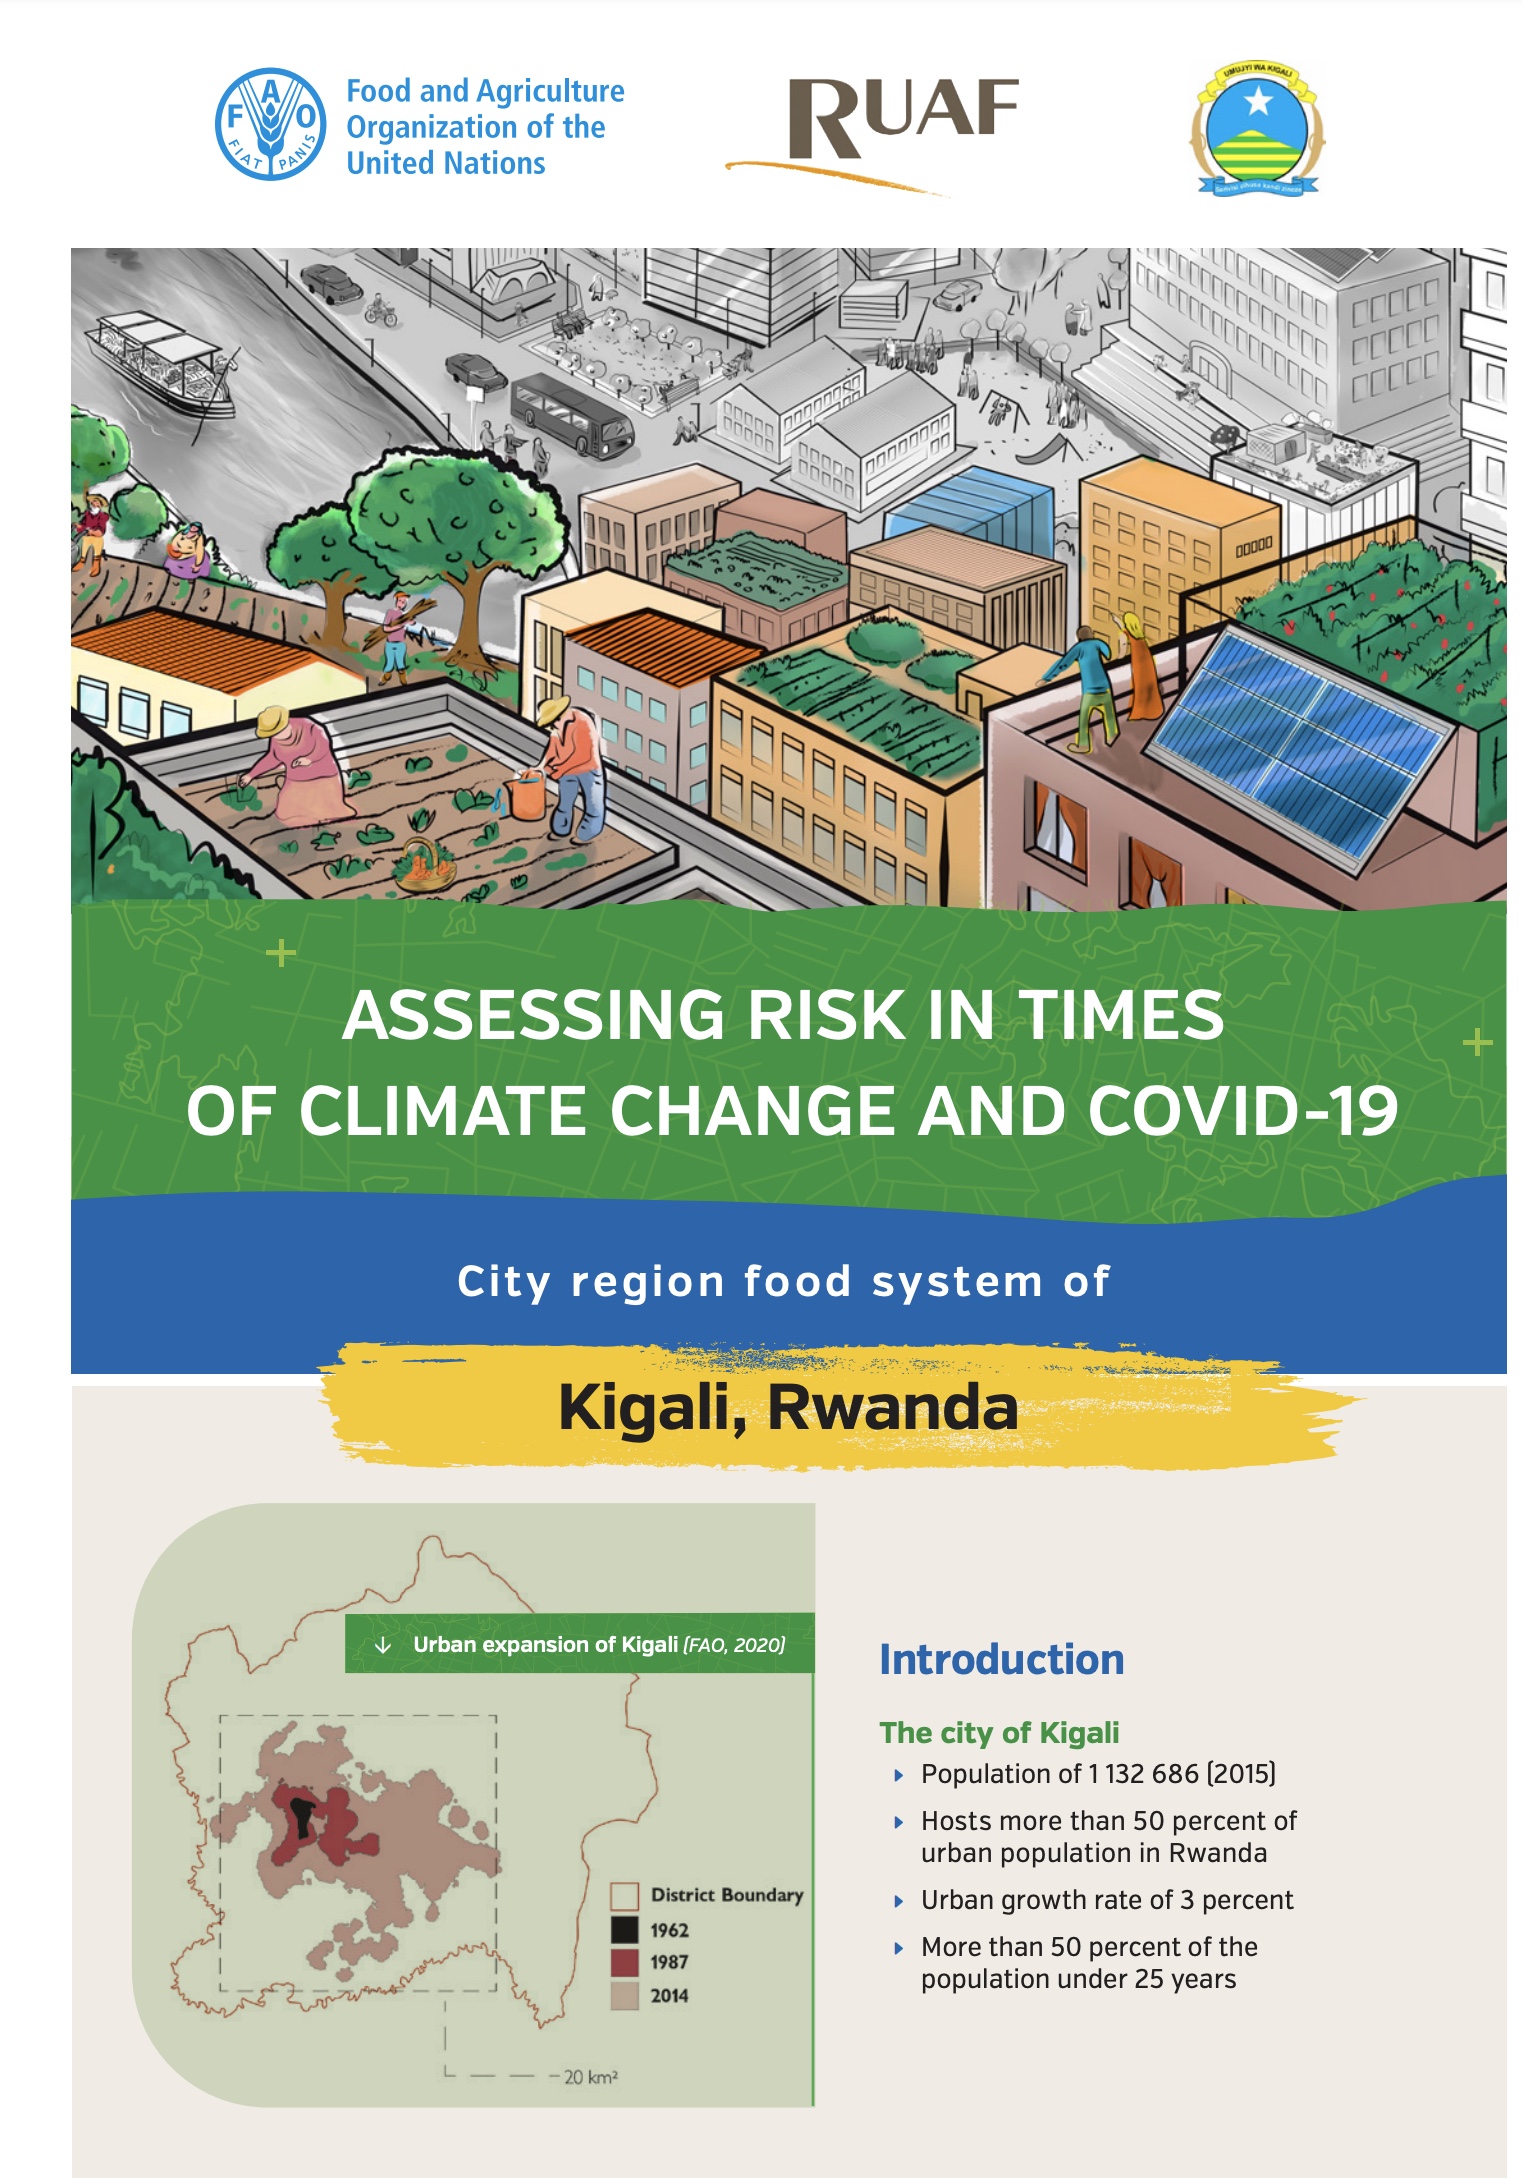 Assessing risk in times of climate change and COVID-19: Kigali, Rwanda